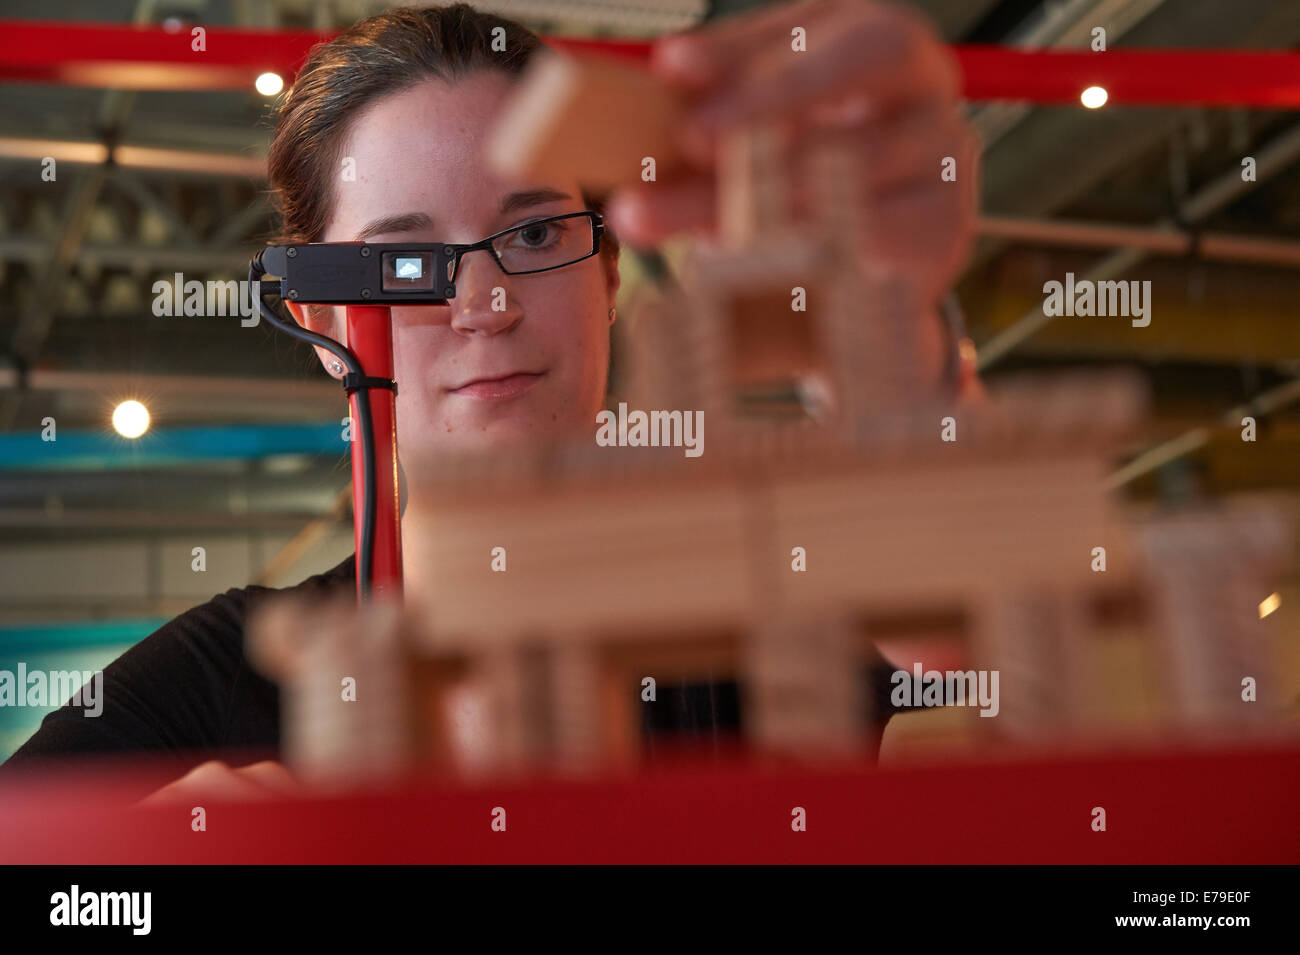 Dortmund, Germany. 10th Sep, 2014. DASA employee Jana Rech looks through data glasses showing a construction plan for a tower made of building bricks which she follows while building the tower in the exhibition «Schoene schlaue Arbeitswelt» (lit: Beautiful intelligent working world) at DASA Working World Exhibition in Dortmund, Germany, 10 September 2014. The exhibition explores technical possibilities in workspaces and runs from 11 September to 23 November 2014. Photo: Bernd Thissen/dpa/Alamy Live News Stock Photo